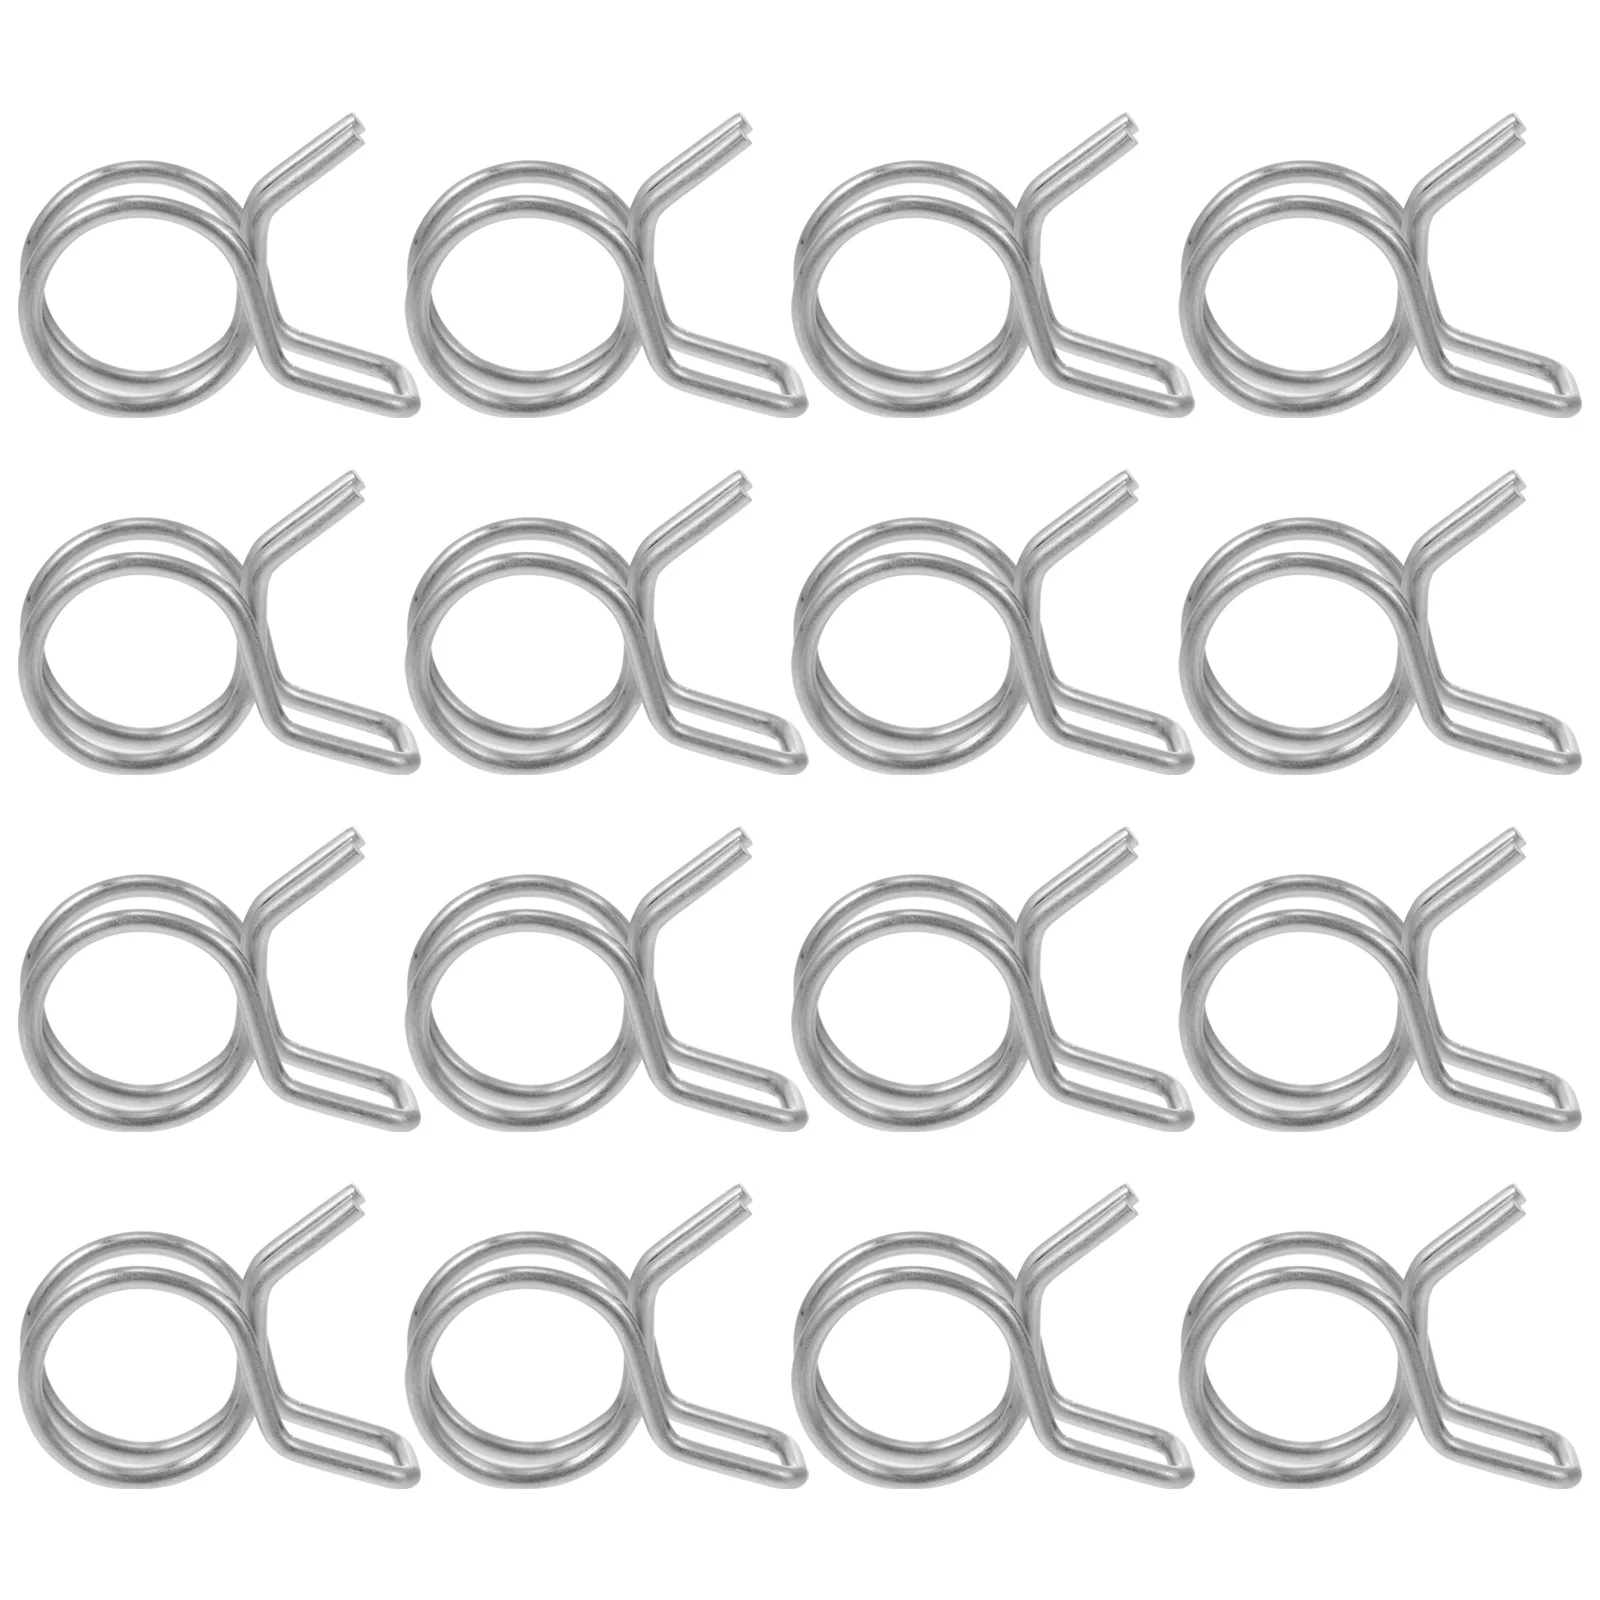 

100Pcs Irrigation Hose Clamp, Firm and Leak- Proof, Easy to Install, Solution for Leaking of Drip Irrigation Connector,